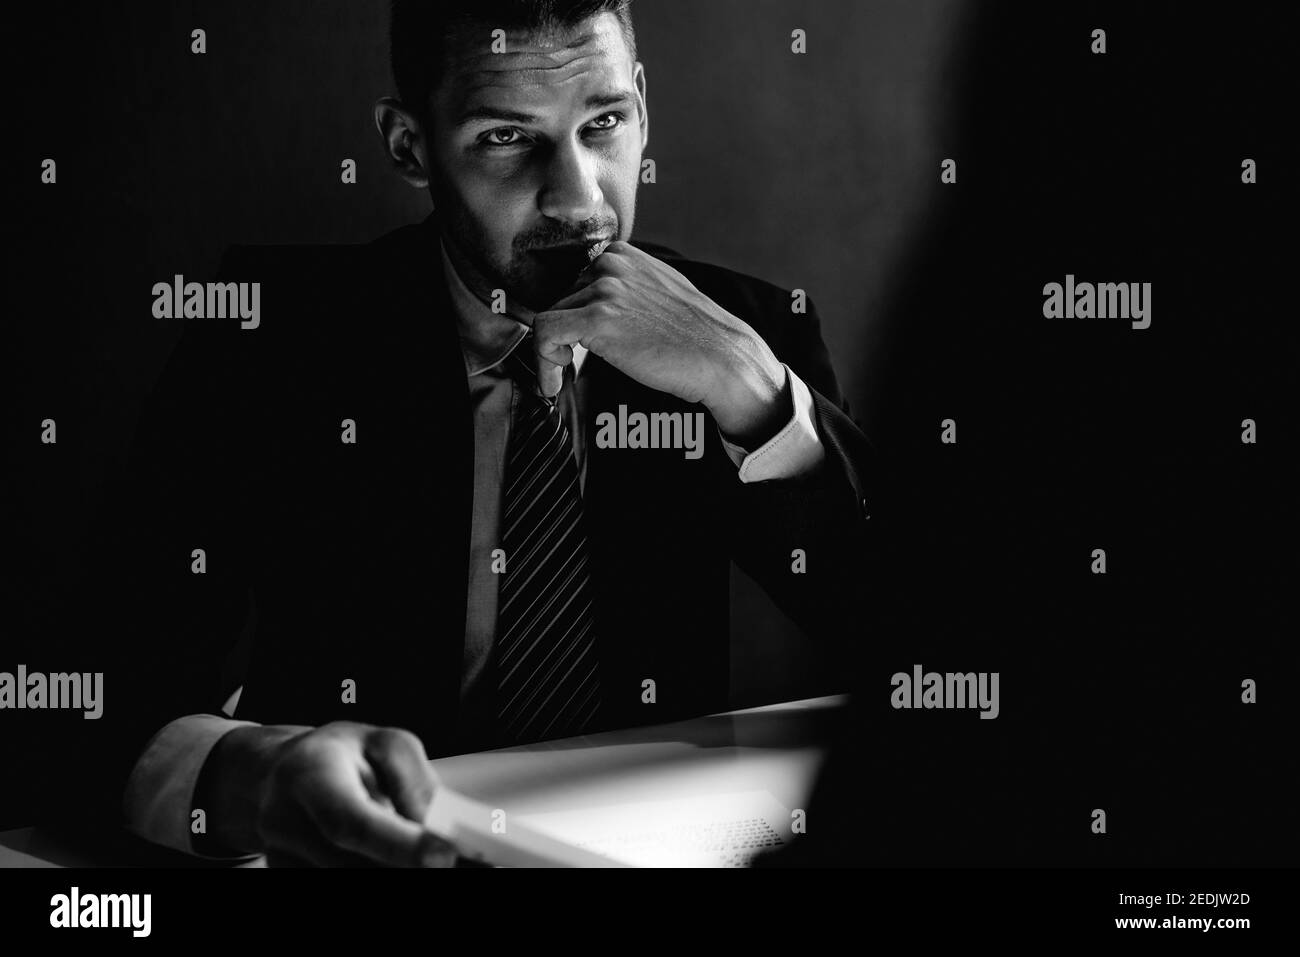 Detective interview suspect or criminal man in interrogation room in black and white tone Stock Photo